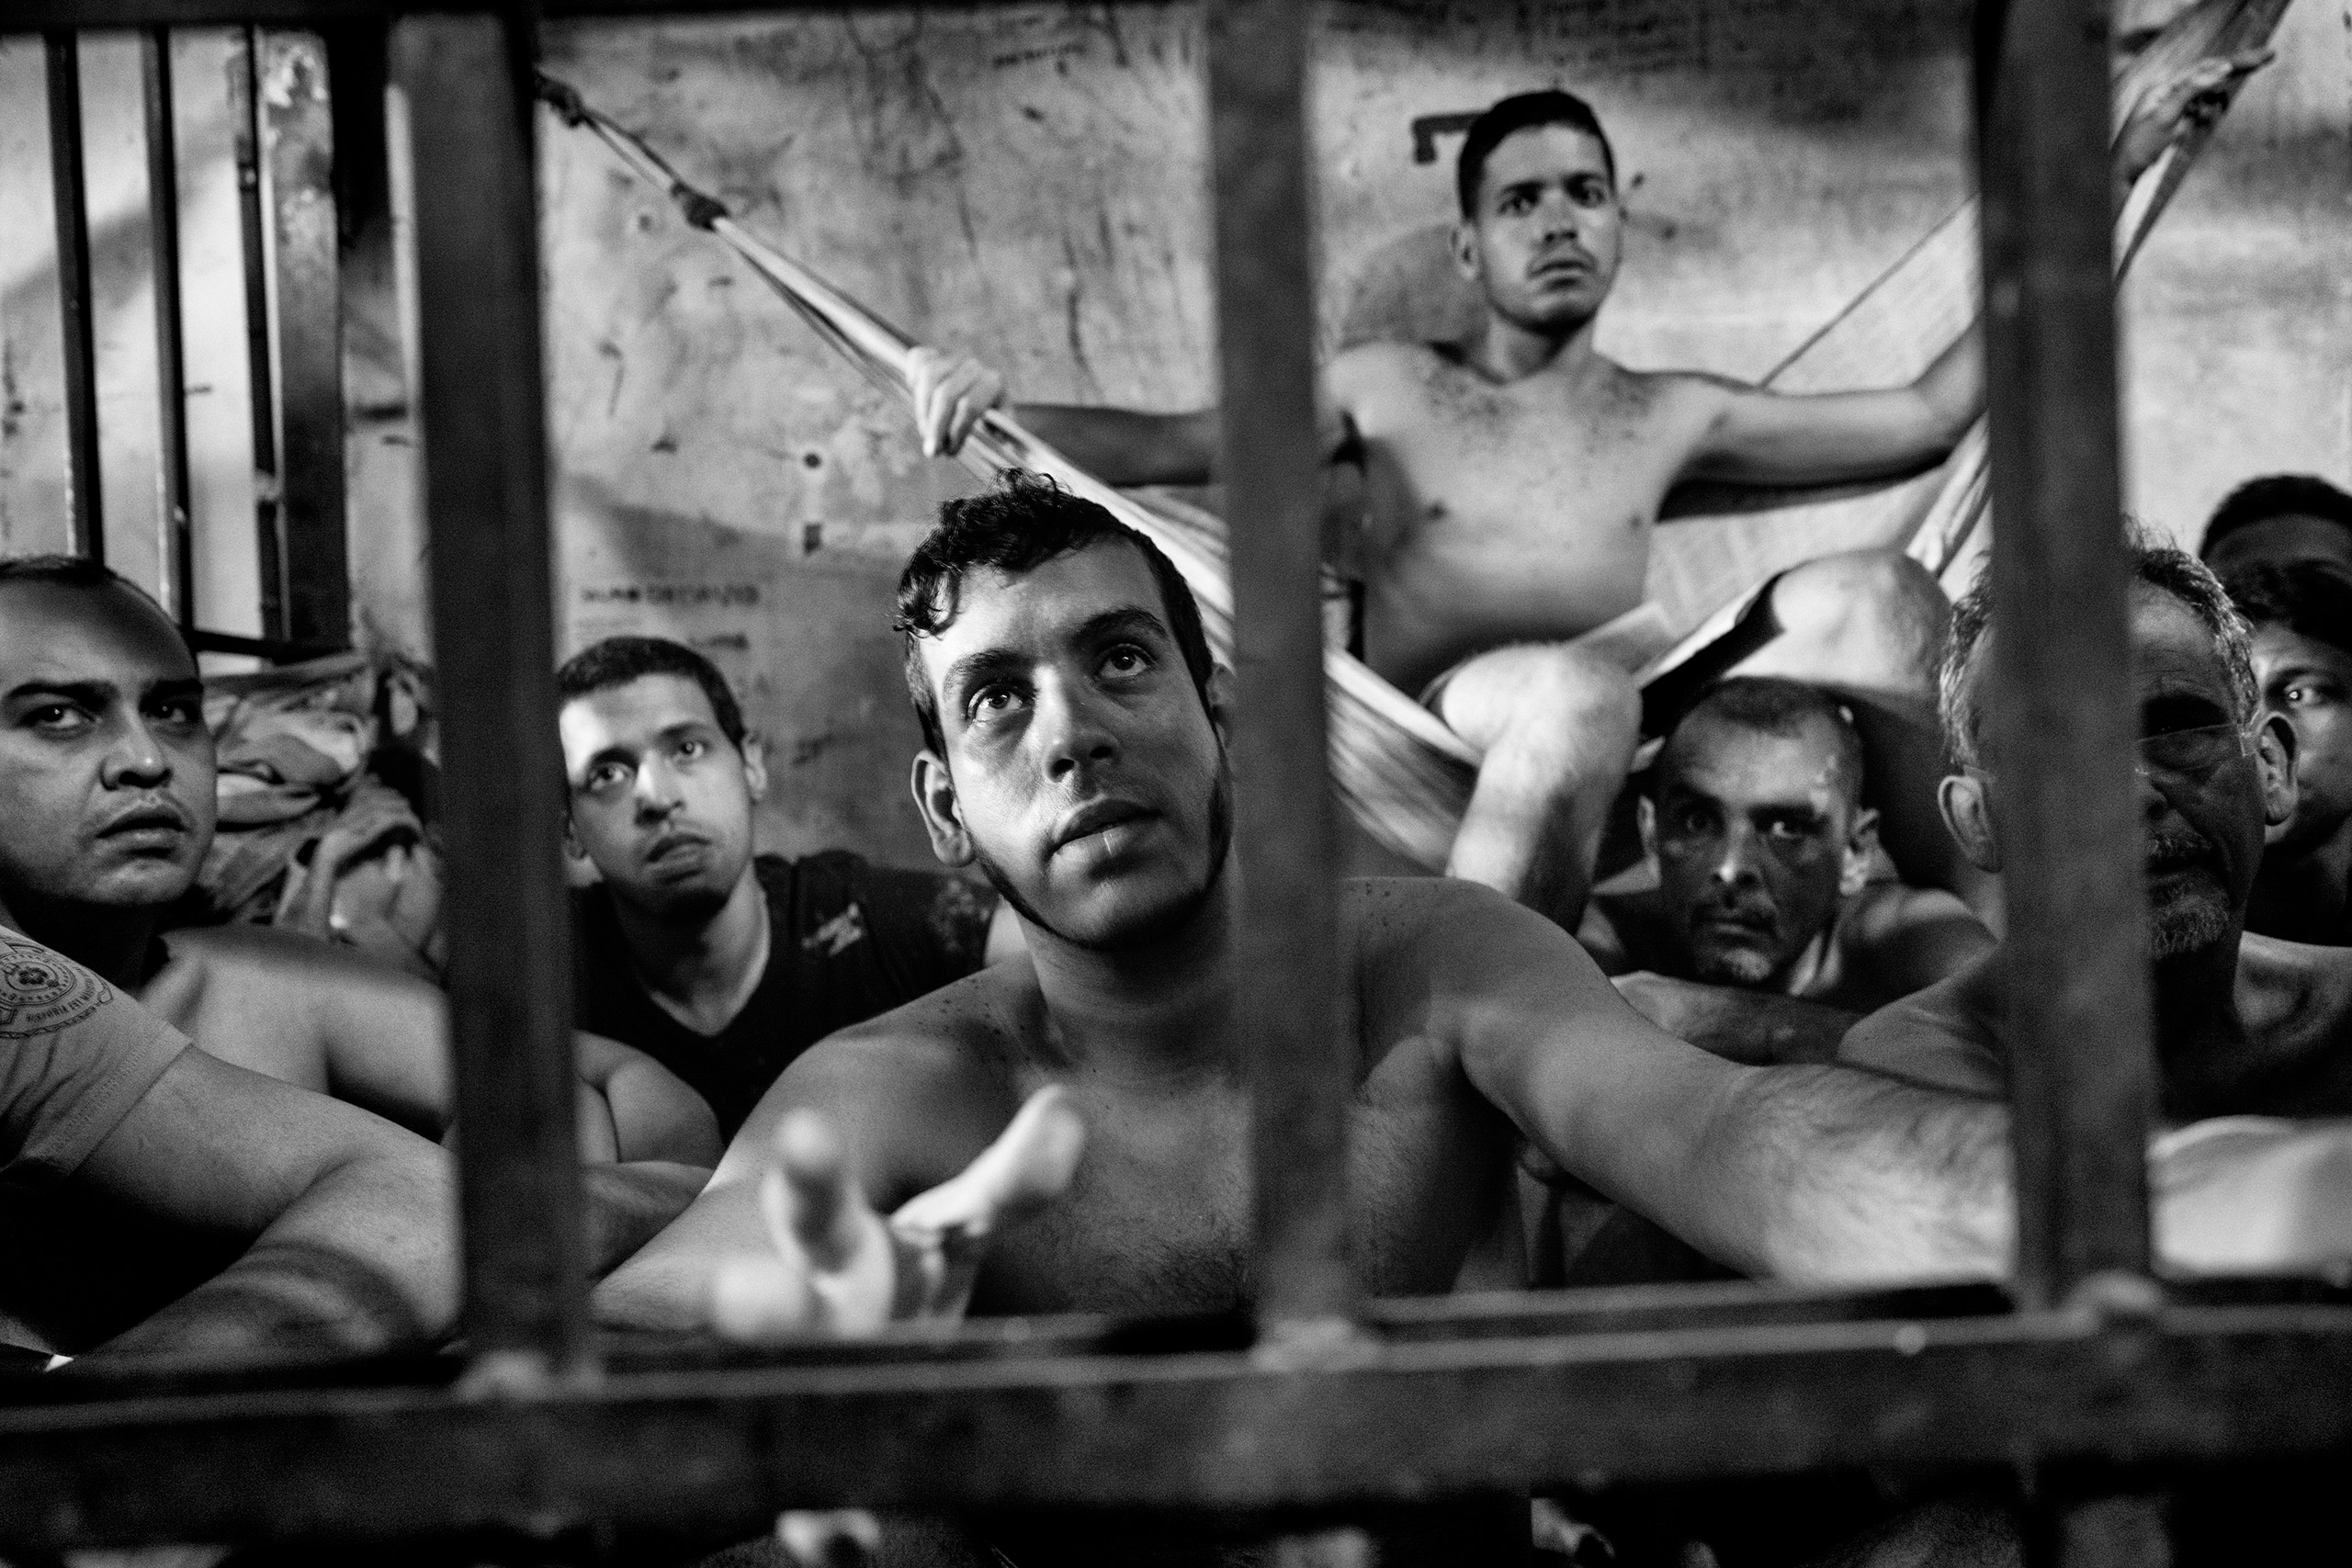 Prisoners inside a crowded cell at the Chacao municipal police station in eastern Caracas. There is no room to  sit and prisoners take turns resting on sheets tied to bars like hammocks.  Jails in Venezuela are seriously overcrowded with shortages of food and medicine. Because of the economic and political crisis, the number of prisoners grows daily as more Venezuelans are arrested for crimes, including mugging, kidnapping and murder, June 2016. From  Witnessing a ‘Complete Collapse of Society’ in Venezuela